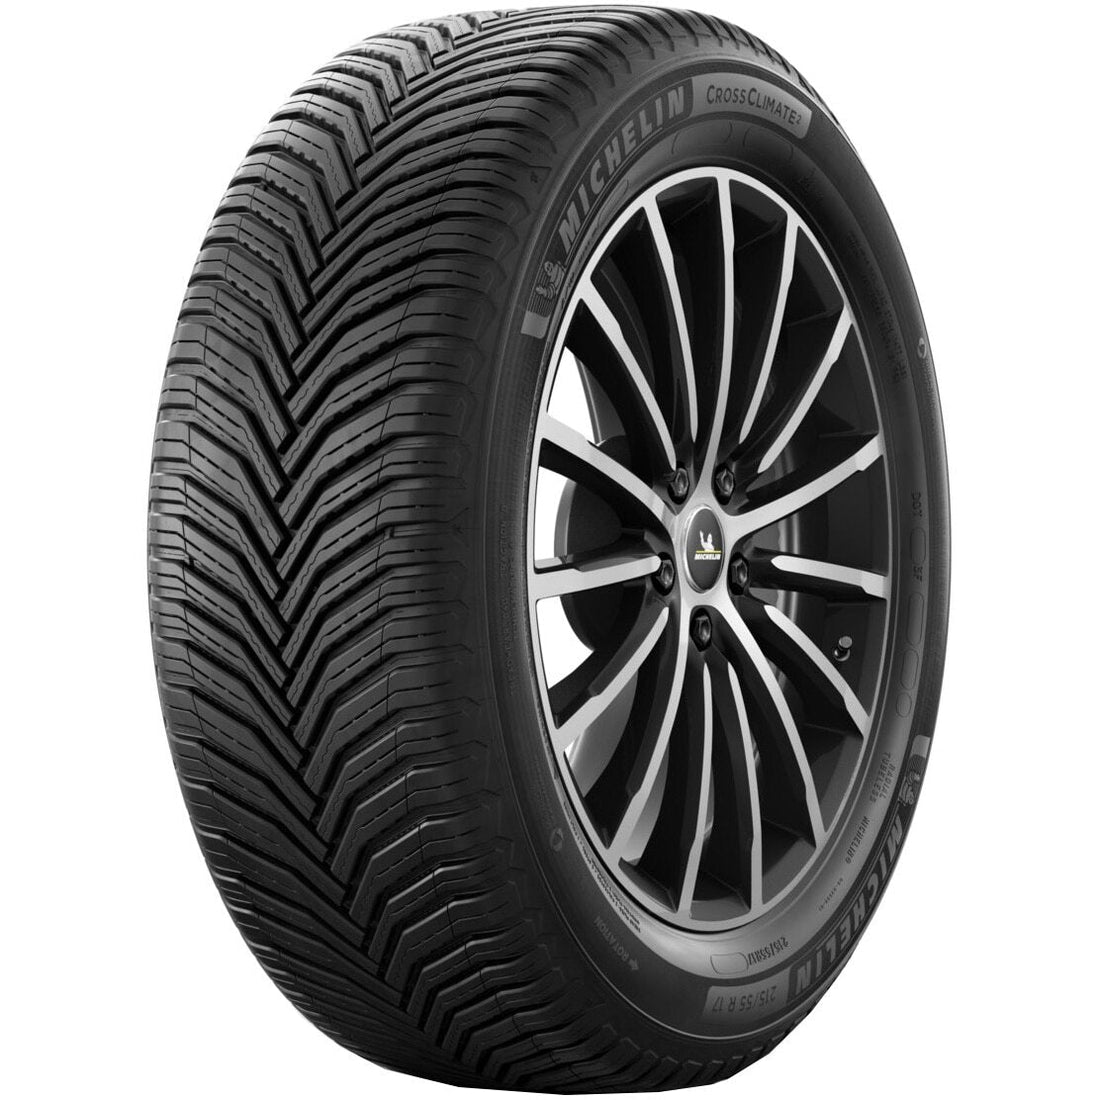 Anvelope All-season Michelin Crossclimate 2 suv 255/45R20 101=825kgW=270 km/h Anvelux